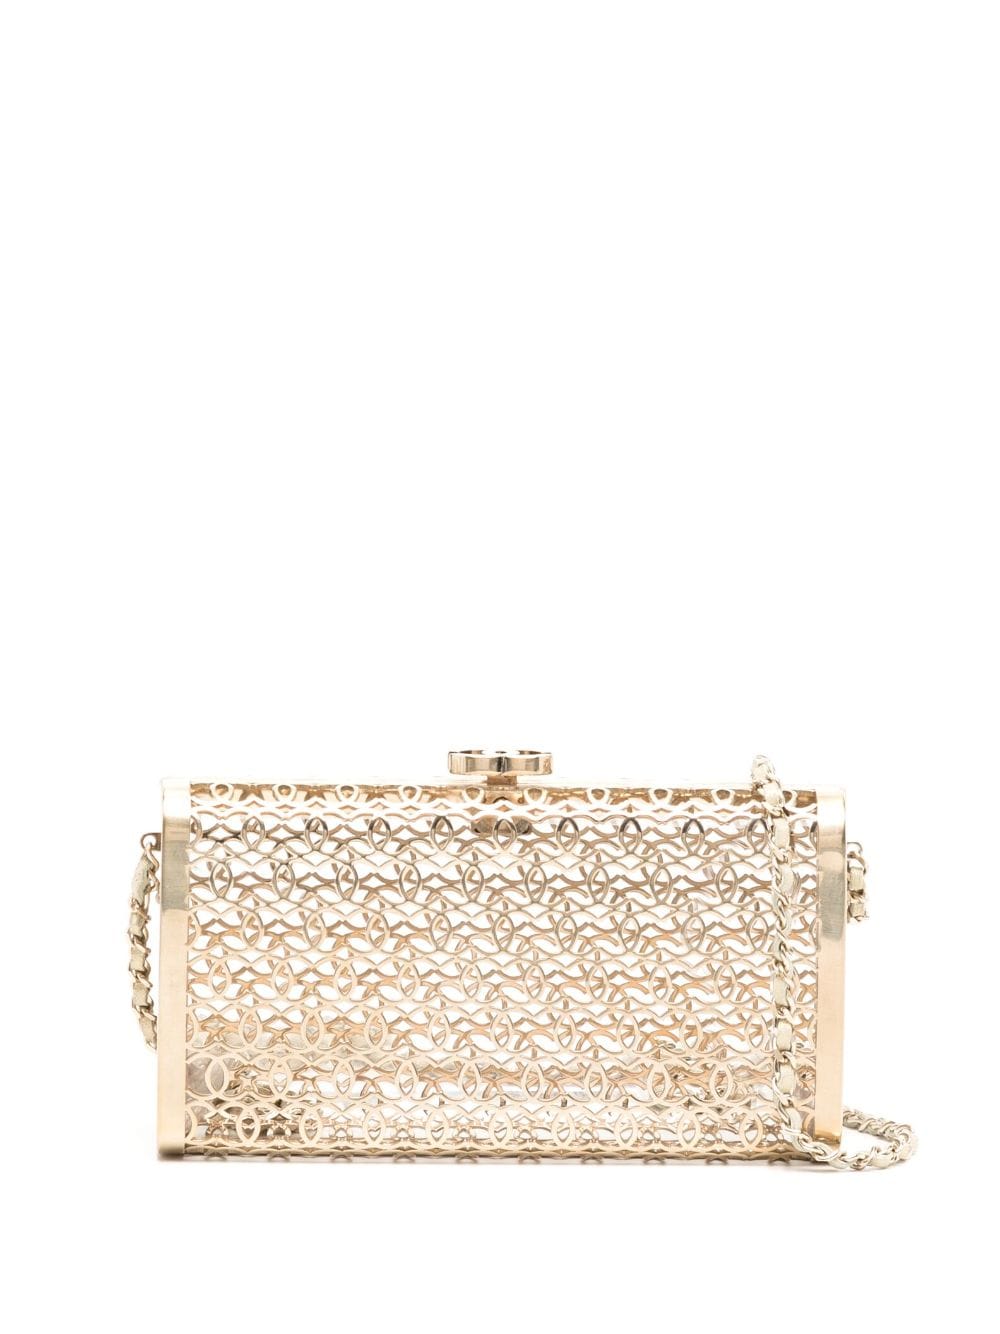 Hammered Gold Metal Bullion Bar Minaudière Clutch Gold Hardware, 2006, Handbags & Accessories, The Chanel Collection, 2022